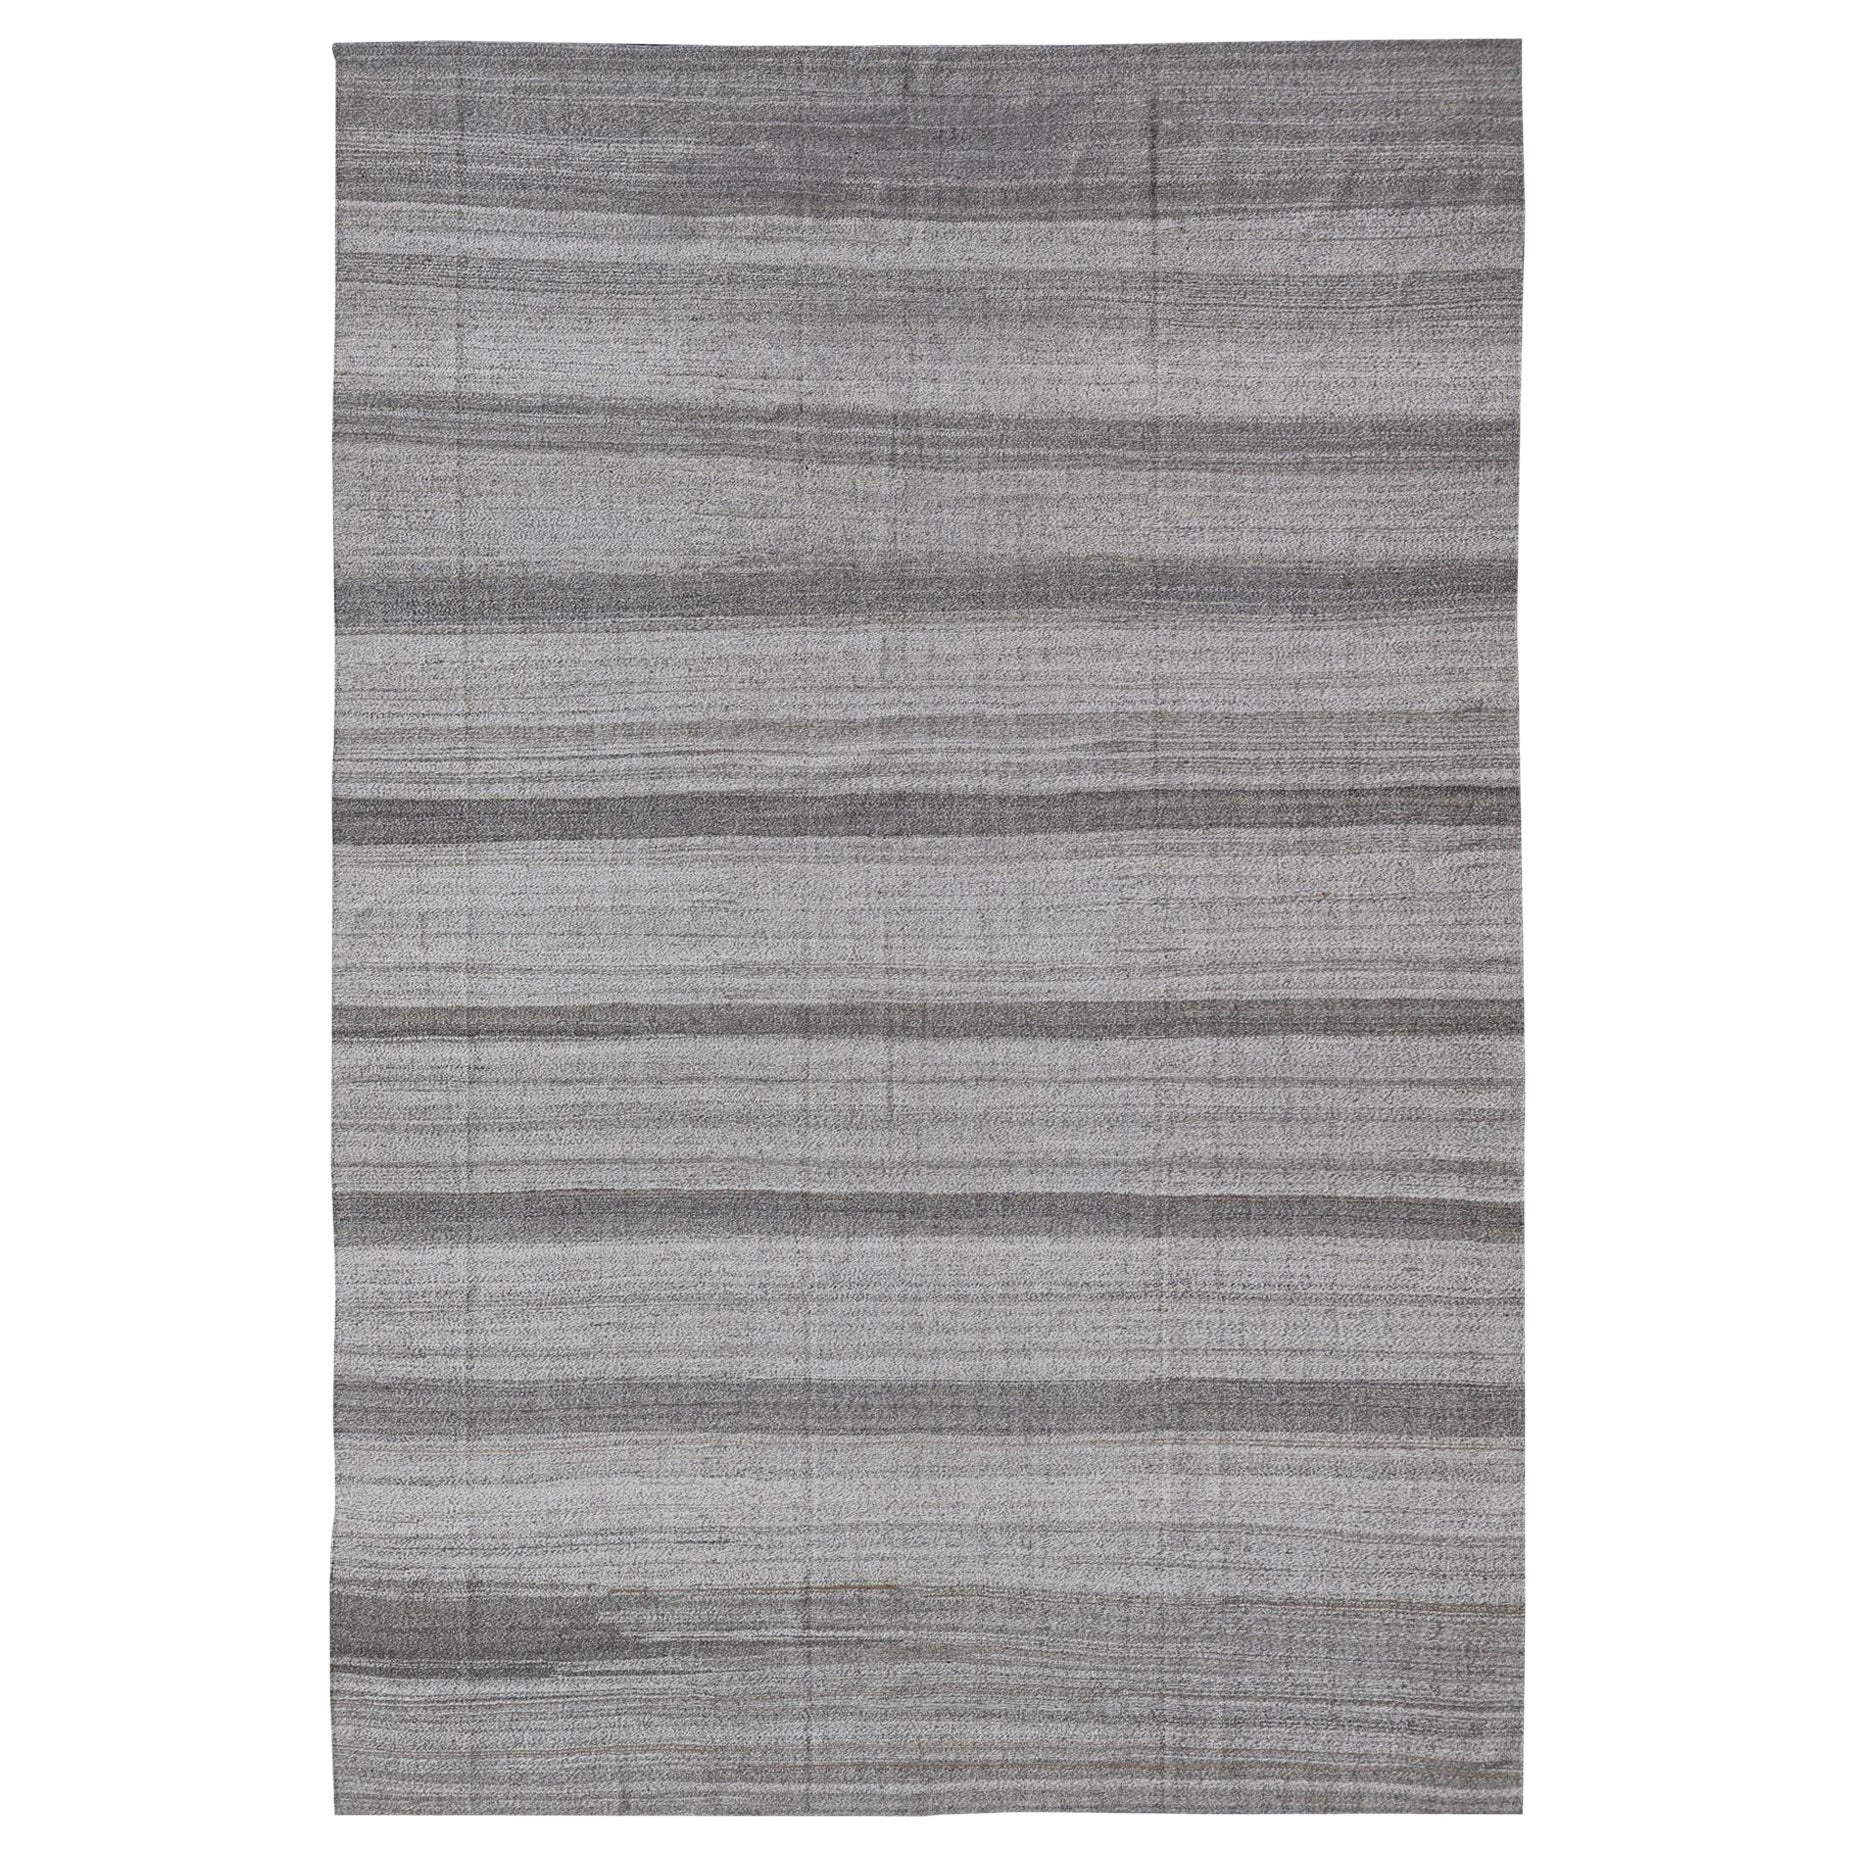  Modern Kilim Rug with Stripes in Neutral tones Shades of Gray  For Sale